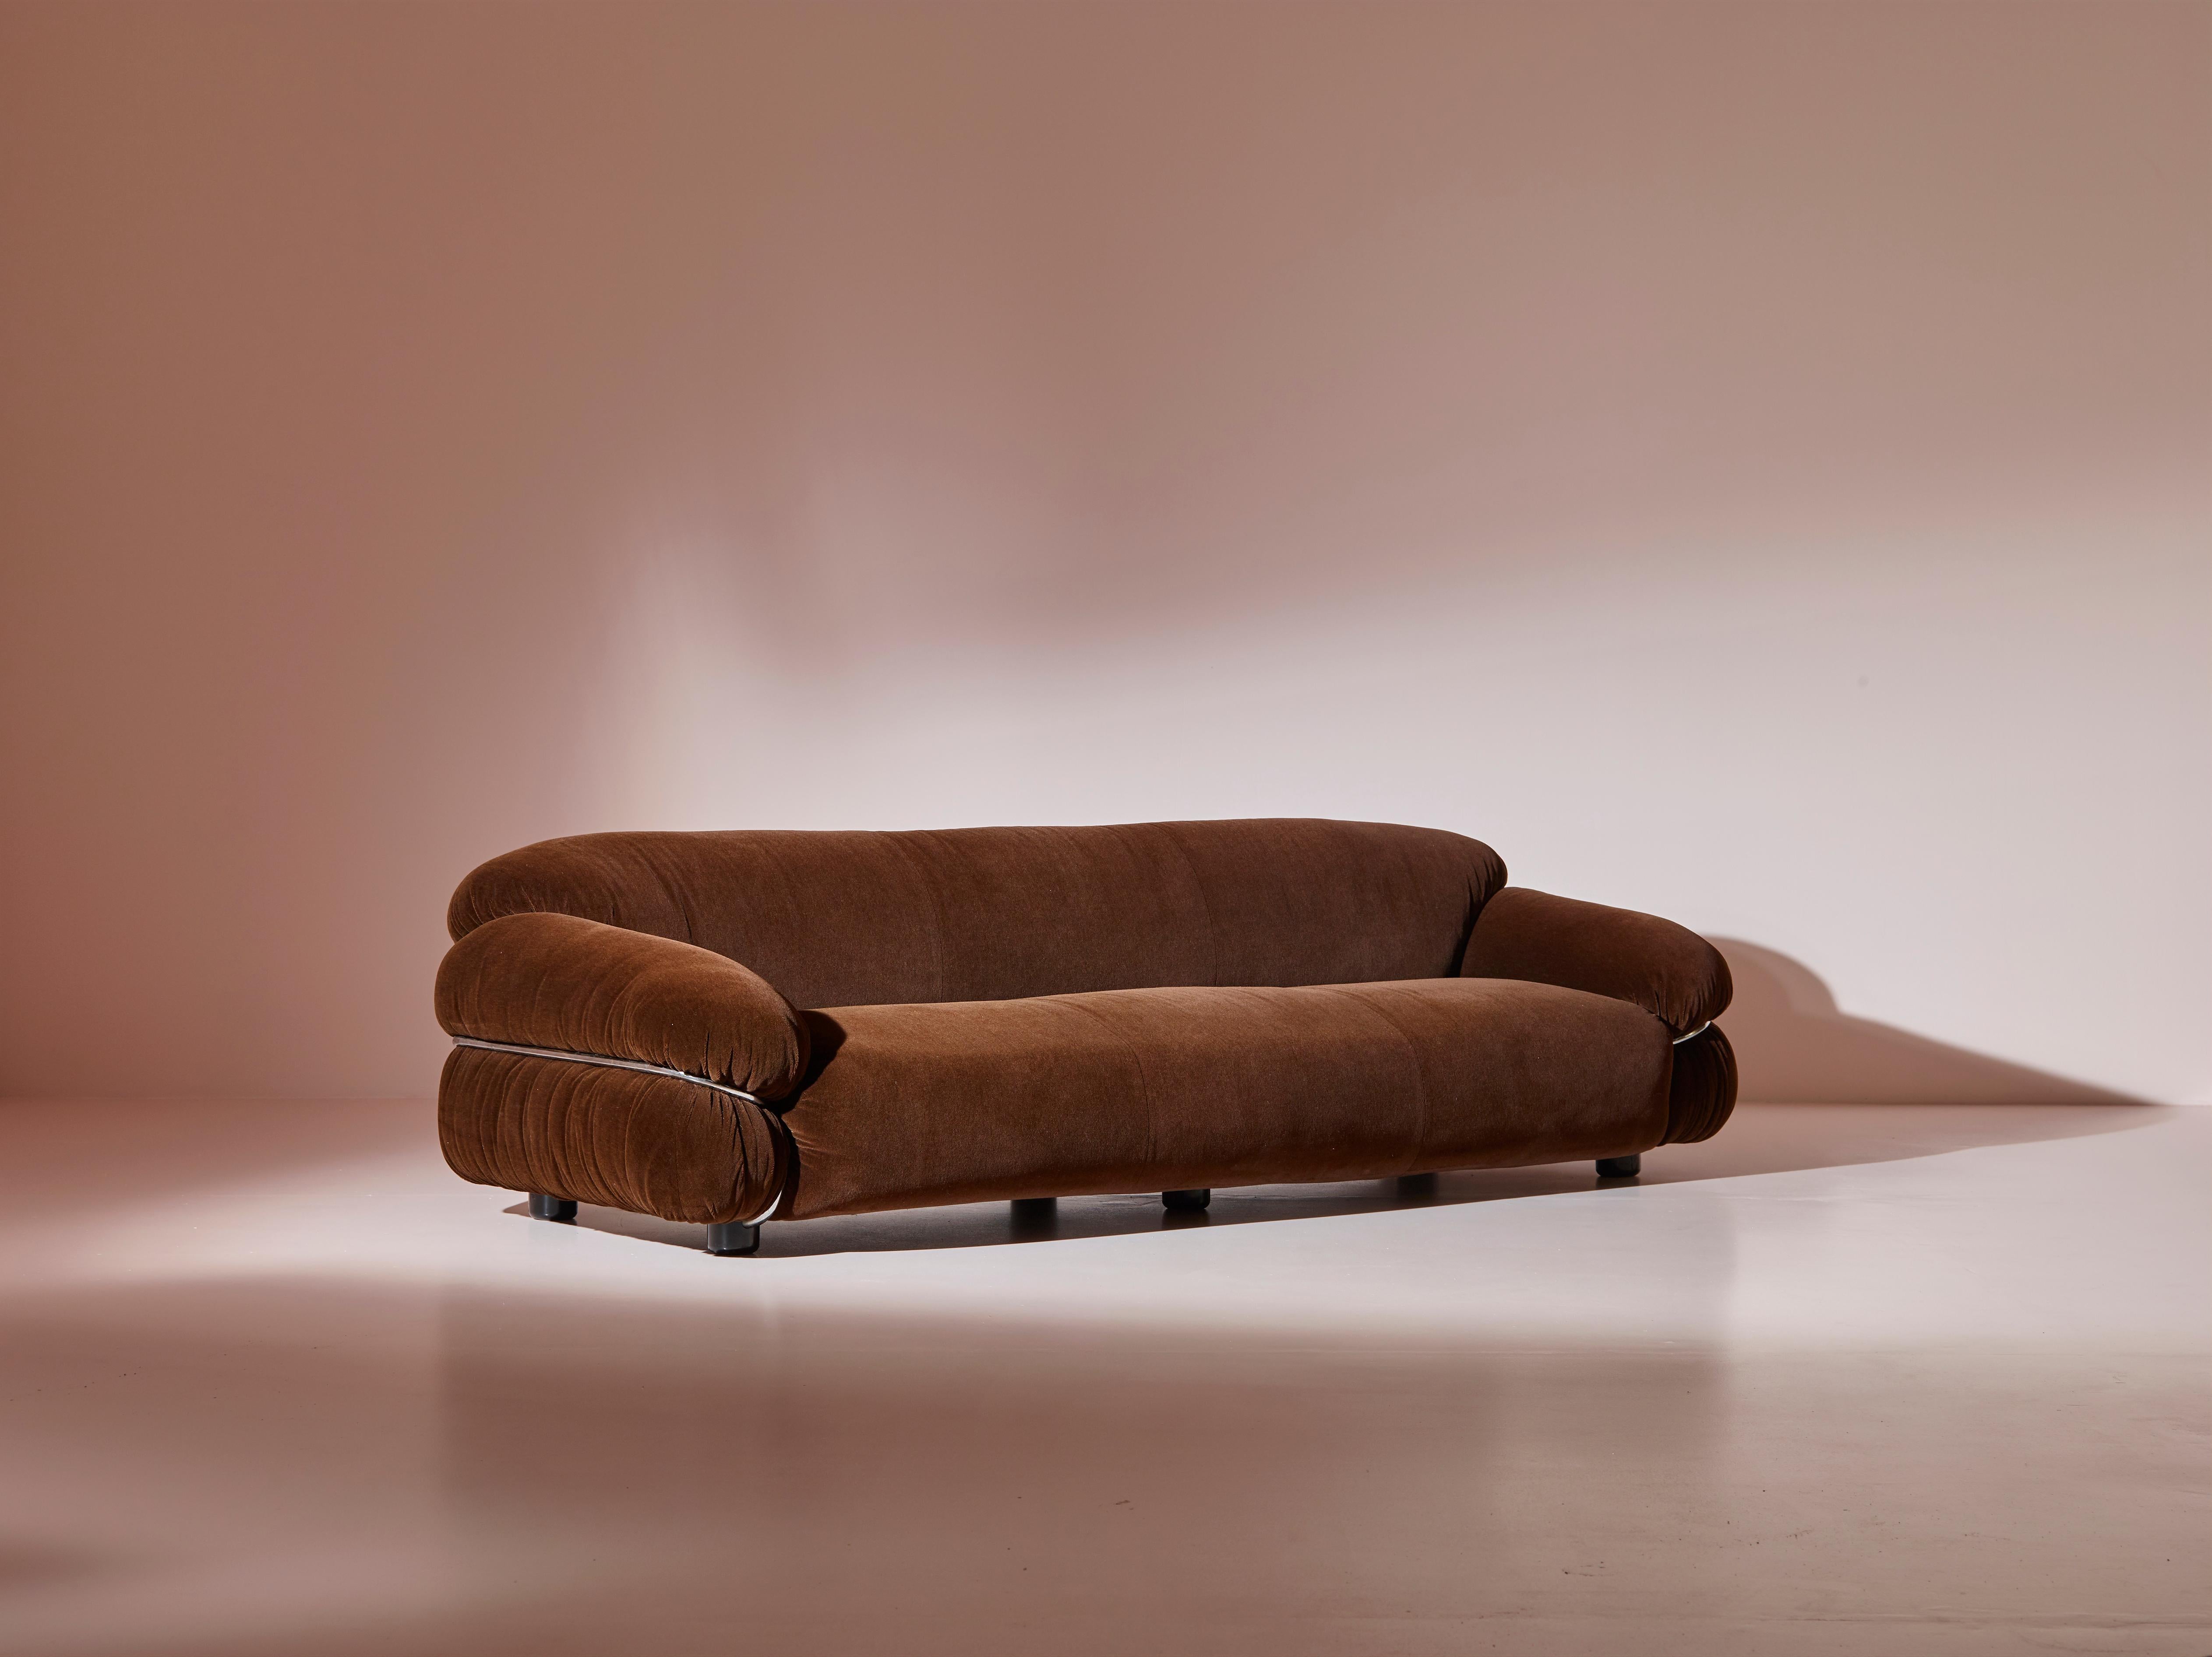 A three-seater Sesann sofa, born from the creative genius of Gianfranco Frattini for Cassina in 1970.

This sofa, meticulously preserved in its original condition, captures the essence of timeless style and functionality. With dimensions of H 27.56